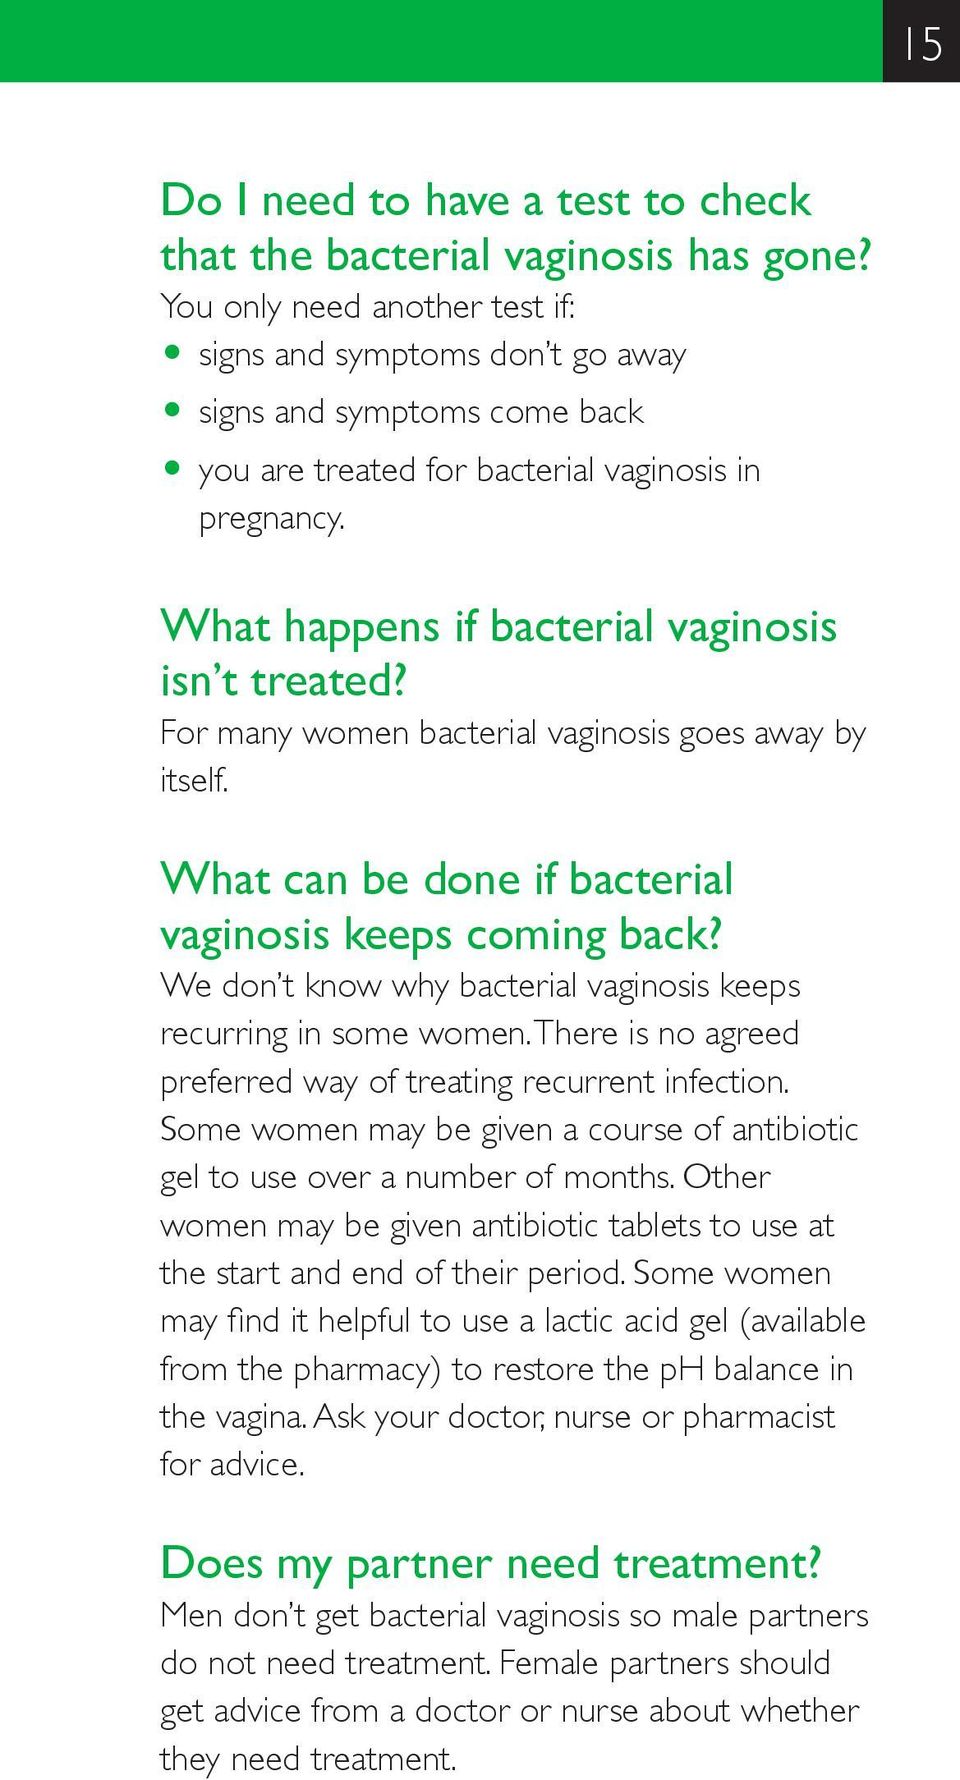 What happens if bacterial vaginosis isn t treated? For many women bacterial vaginosis goes away by itself. What can be done if bacterial vaginosis keeps coming back?